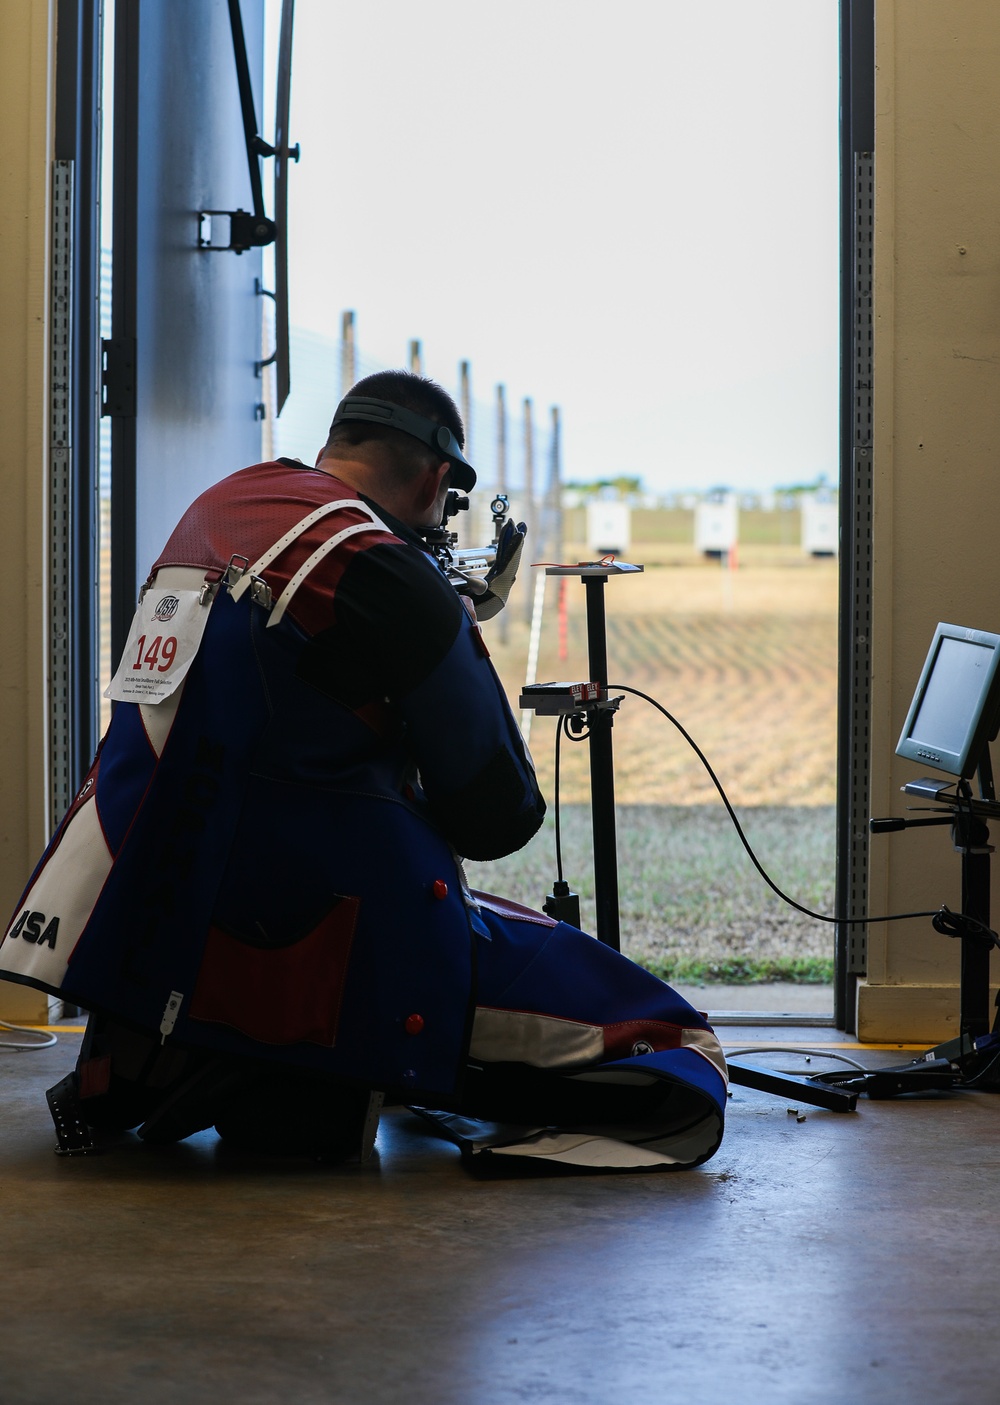 Rifle marksmanship skills could lead to a third Olympics for Fort Benning Soldier